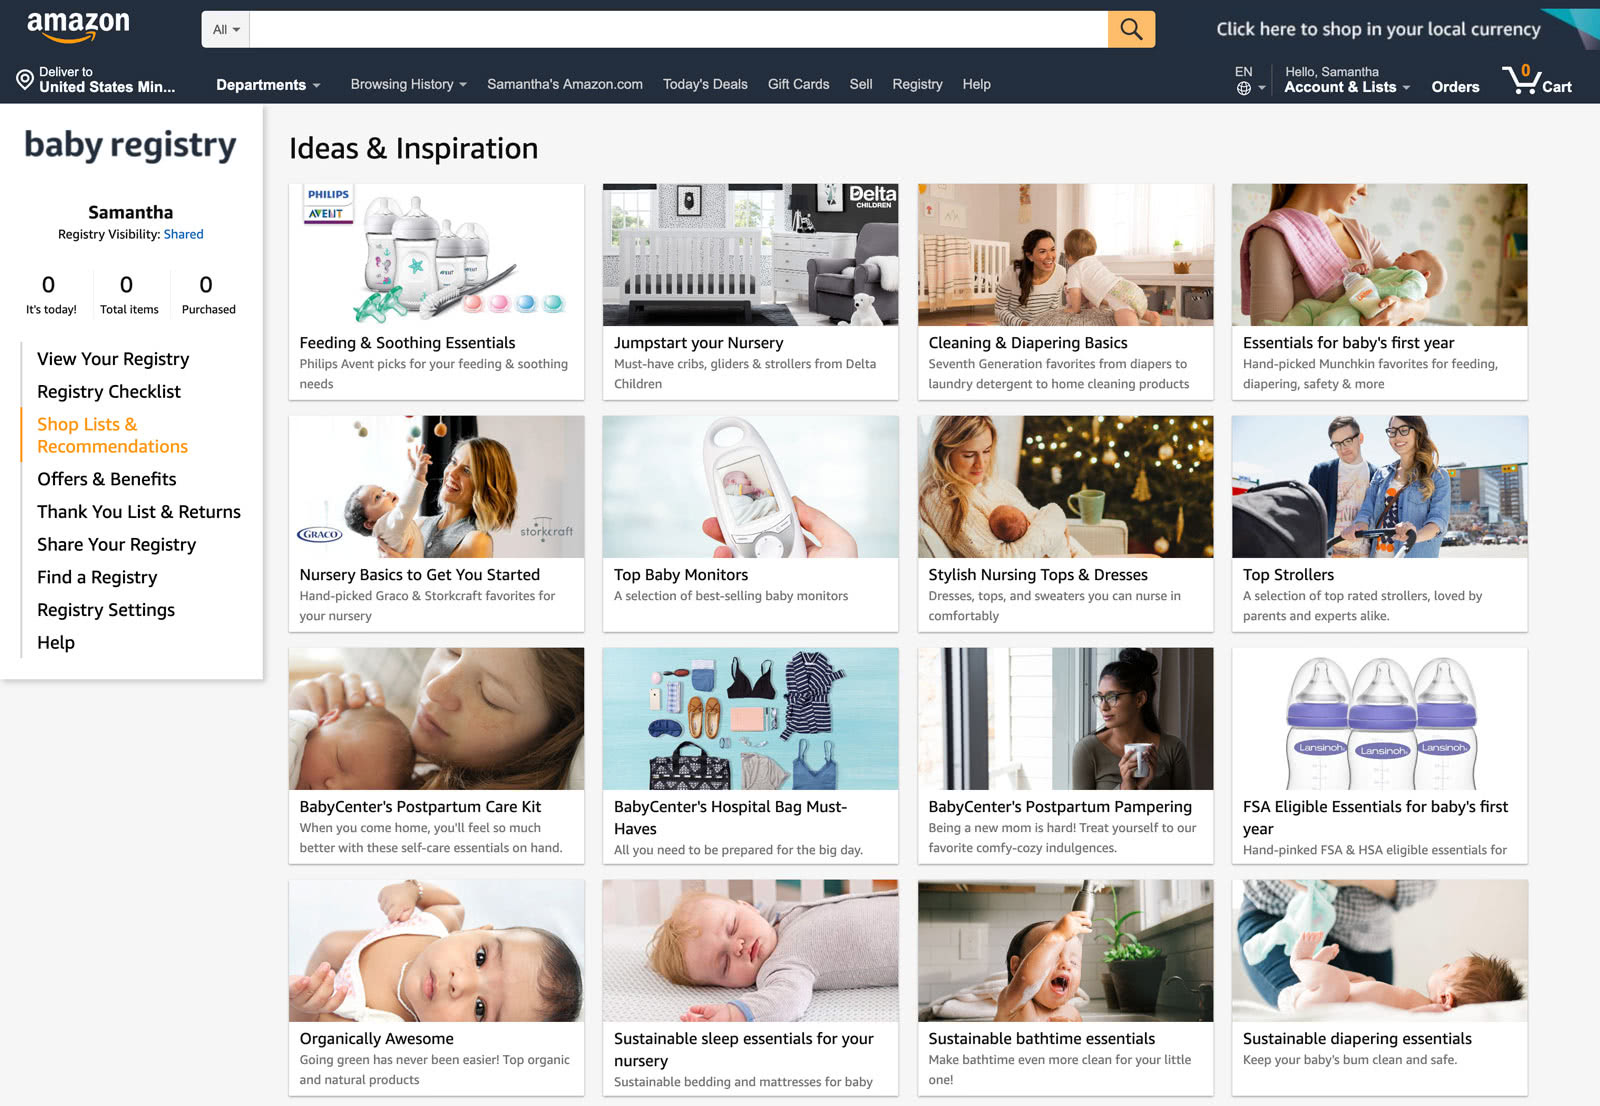 Amazon Baby Registry guide - checklist ideas and inspirations Step 3 - Baby Gear Essentials